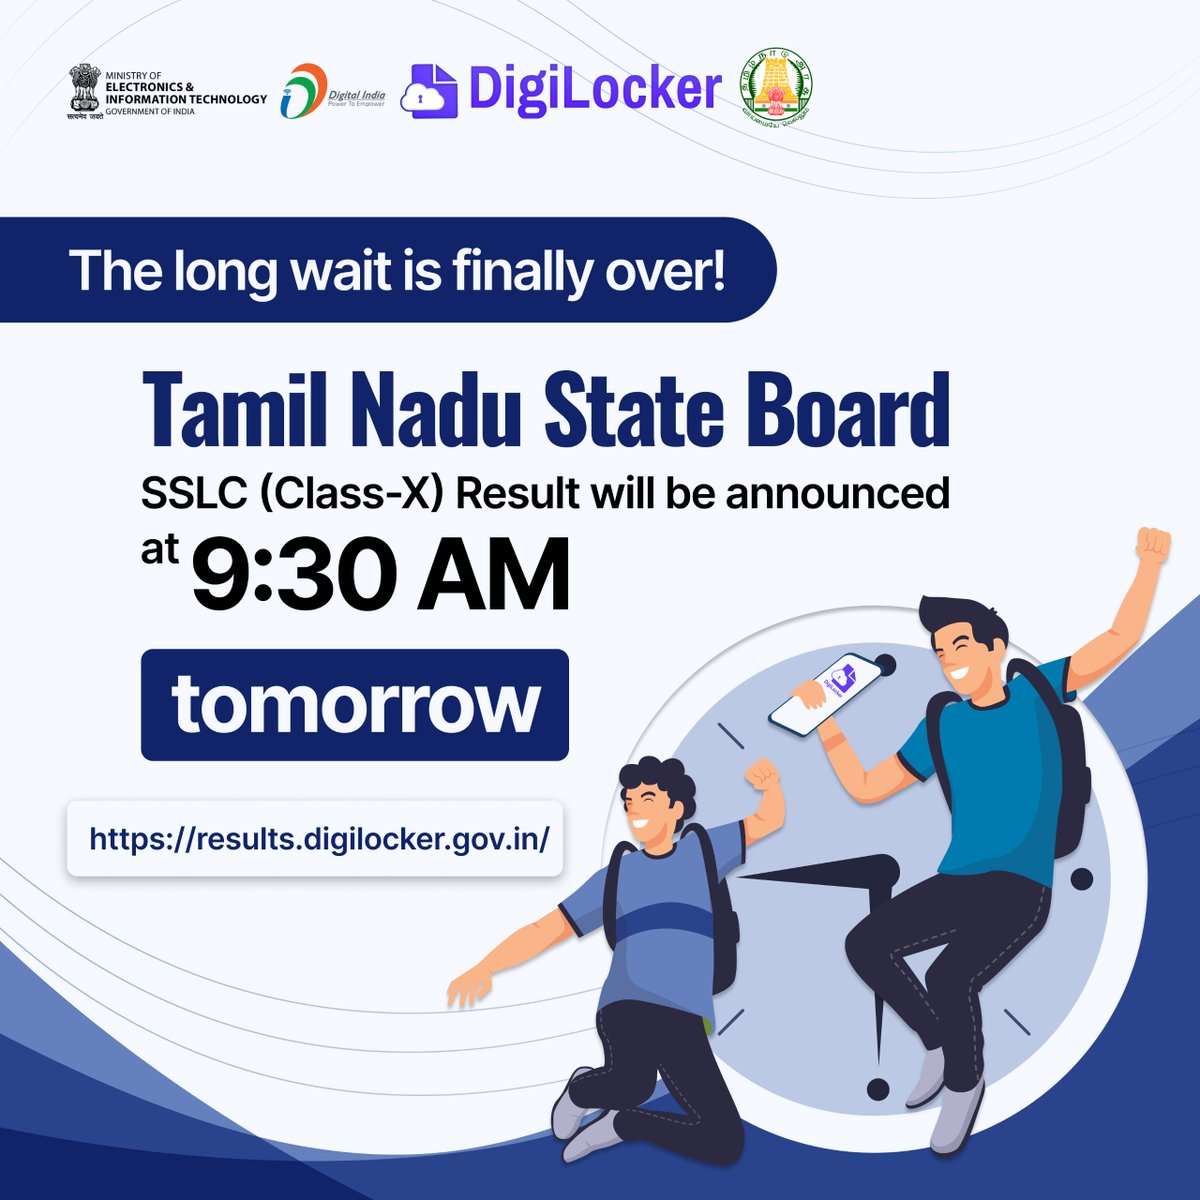 The long-awaited moment has arrived! The Tamil Nadu State Board #SSLC (Class-X) Result will be declared tomorrow at 9:30 AM. Access your results seamlessly on the #DigiLocker Result Page results.digilocker.gov.in #TamilNadu #10thResult